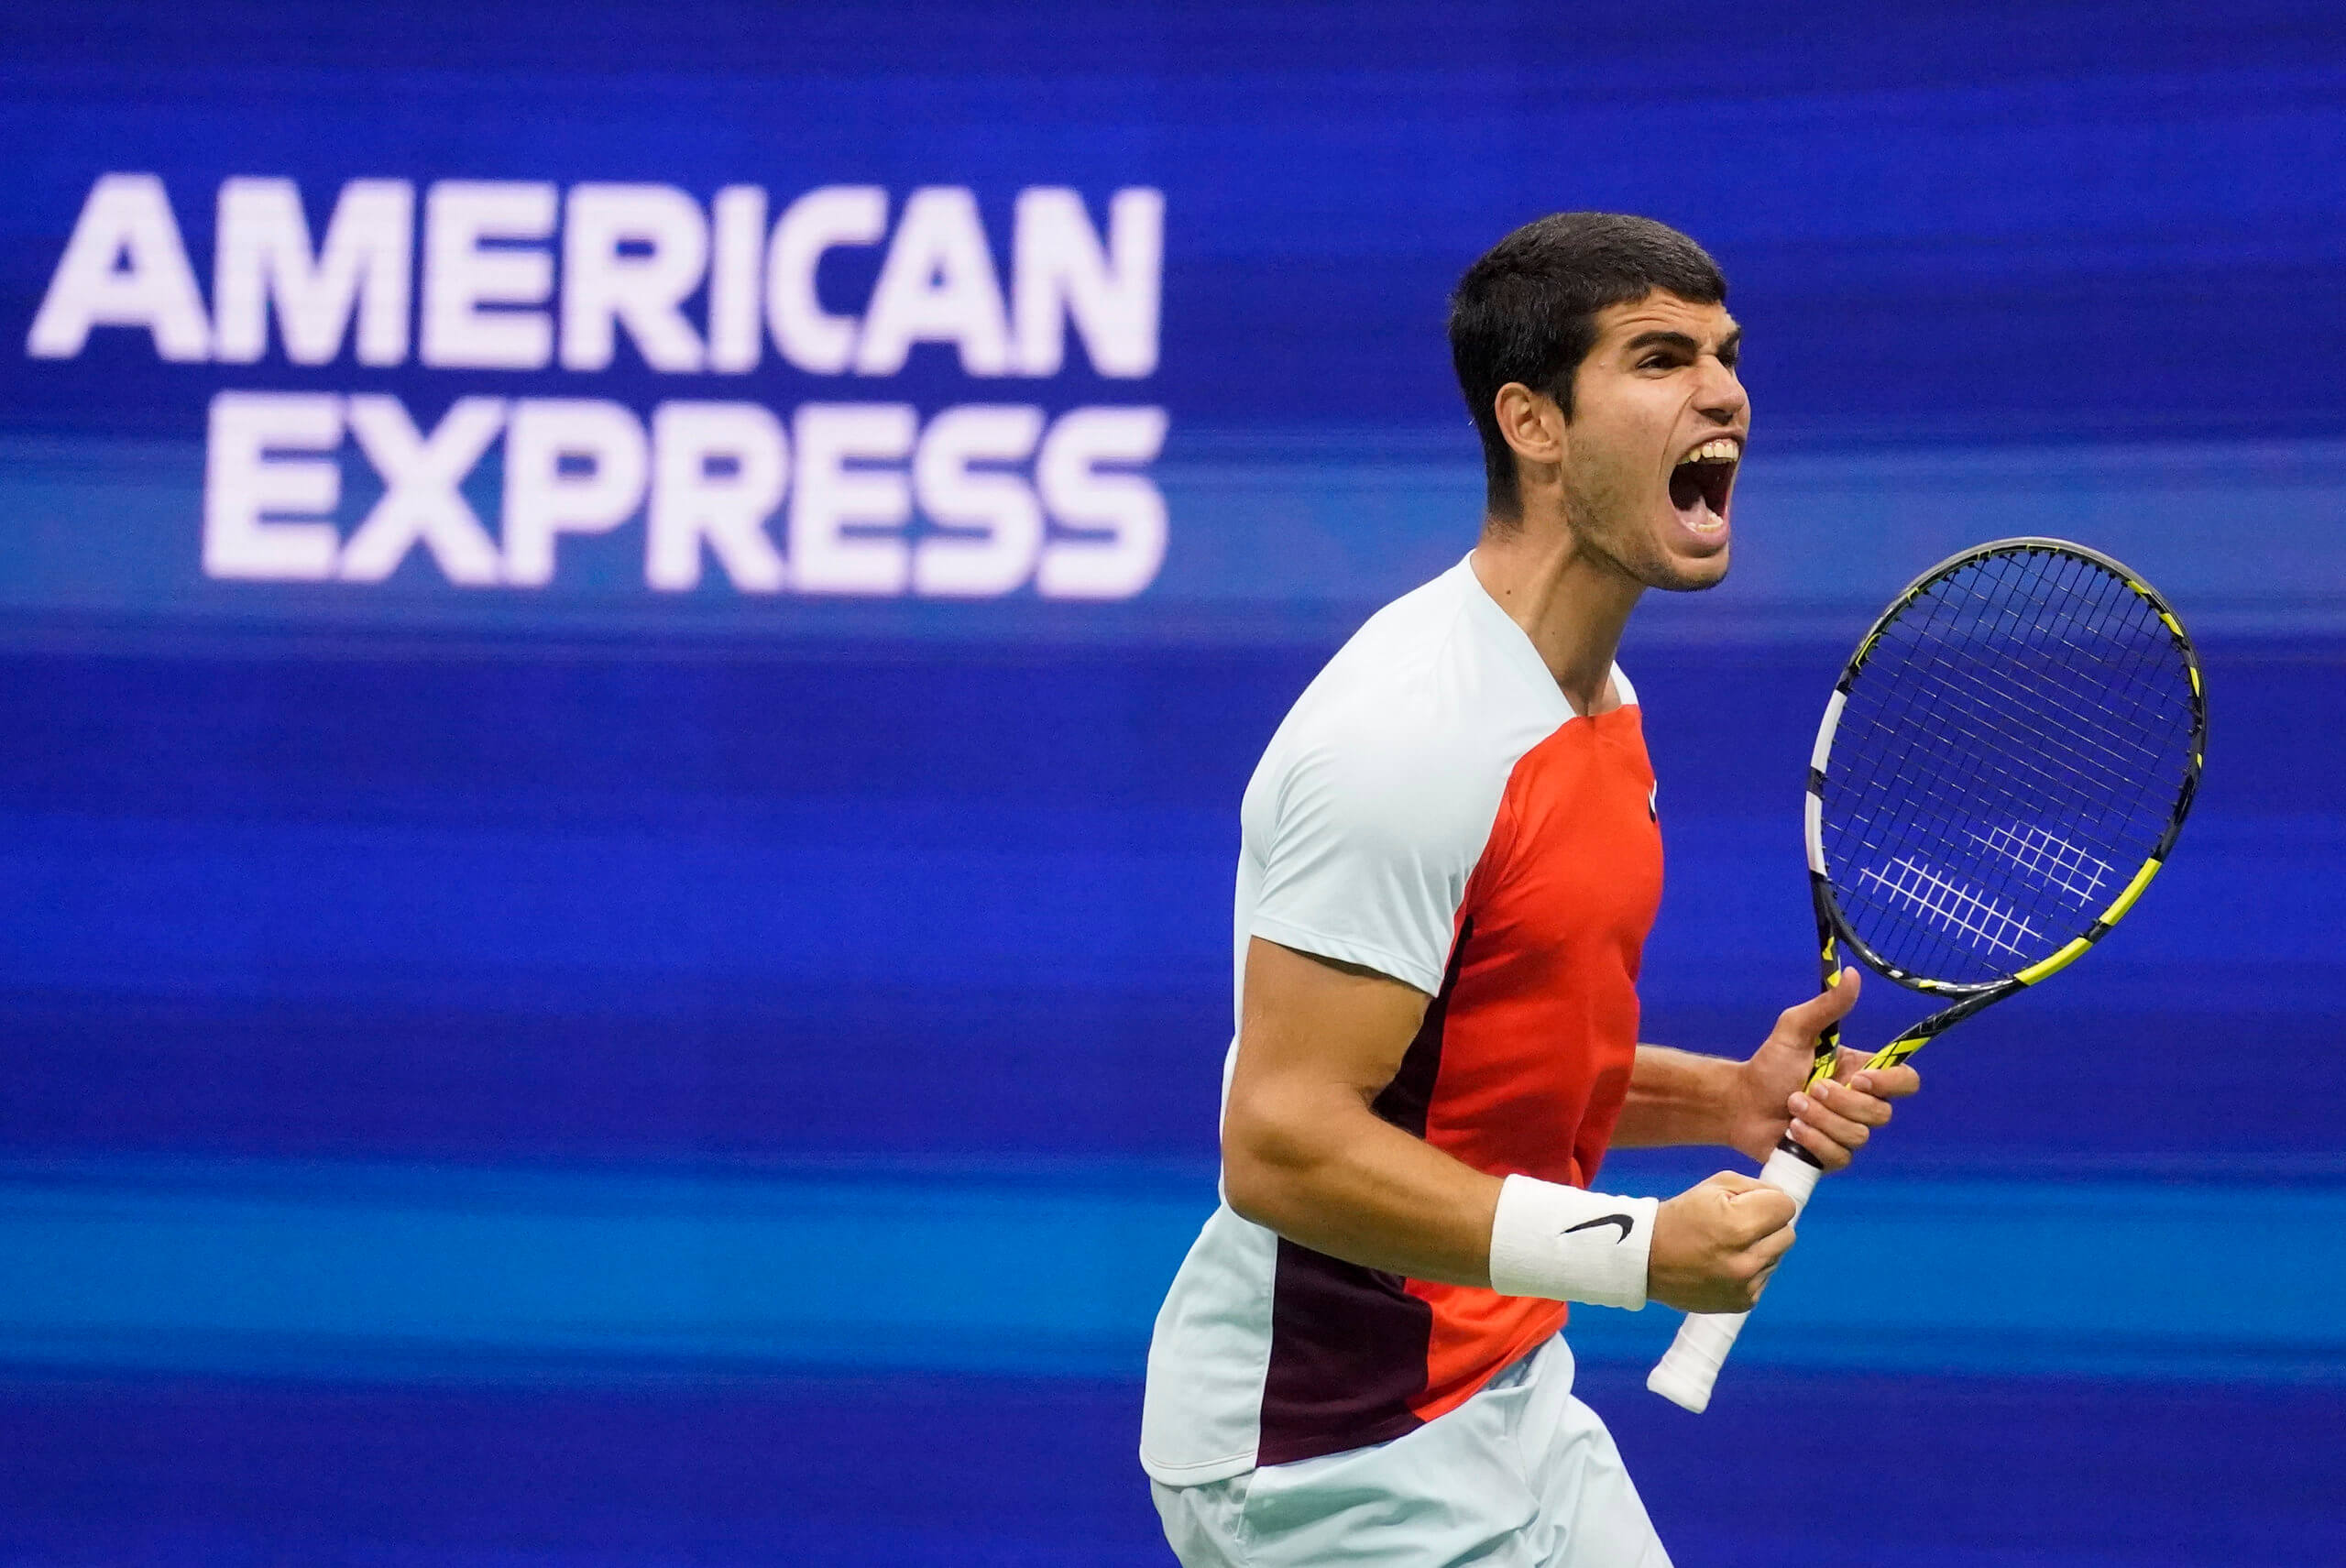 ATP 500 Acapulco Open Betting odds, picks, how to watch, more amNewYork